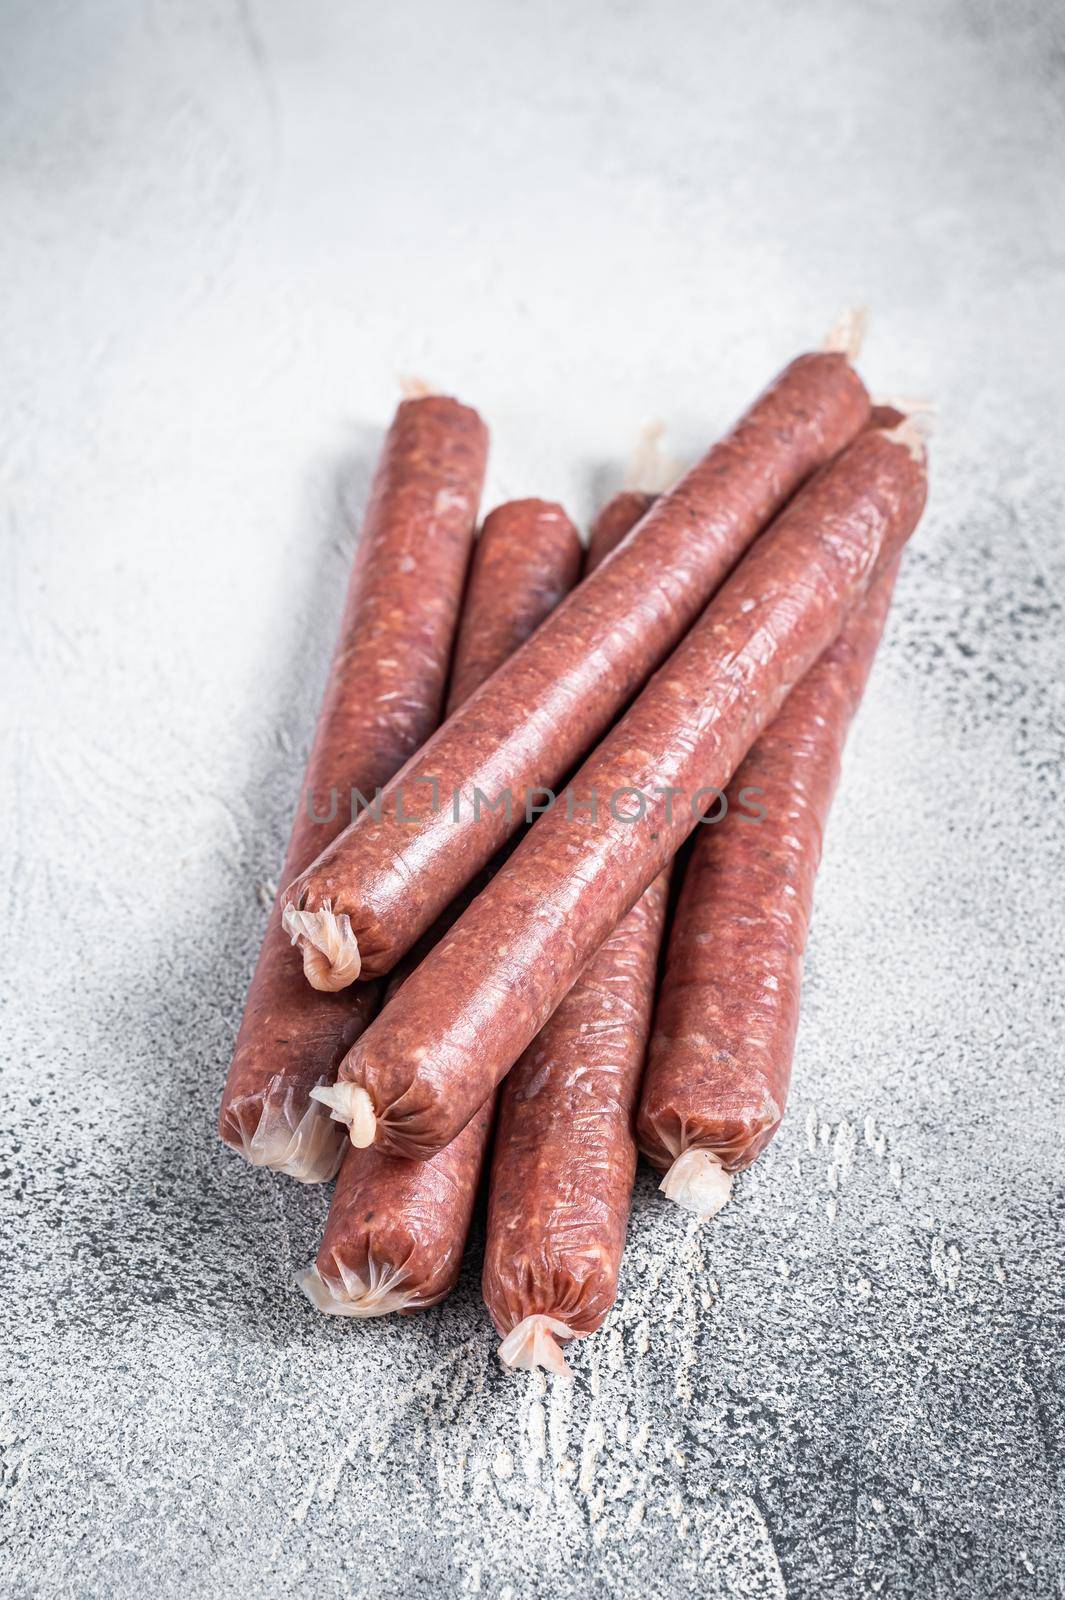 Raw butchers sausages in skins with herbs on kitchen table. White background. Top view by Composter